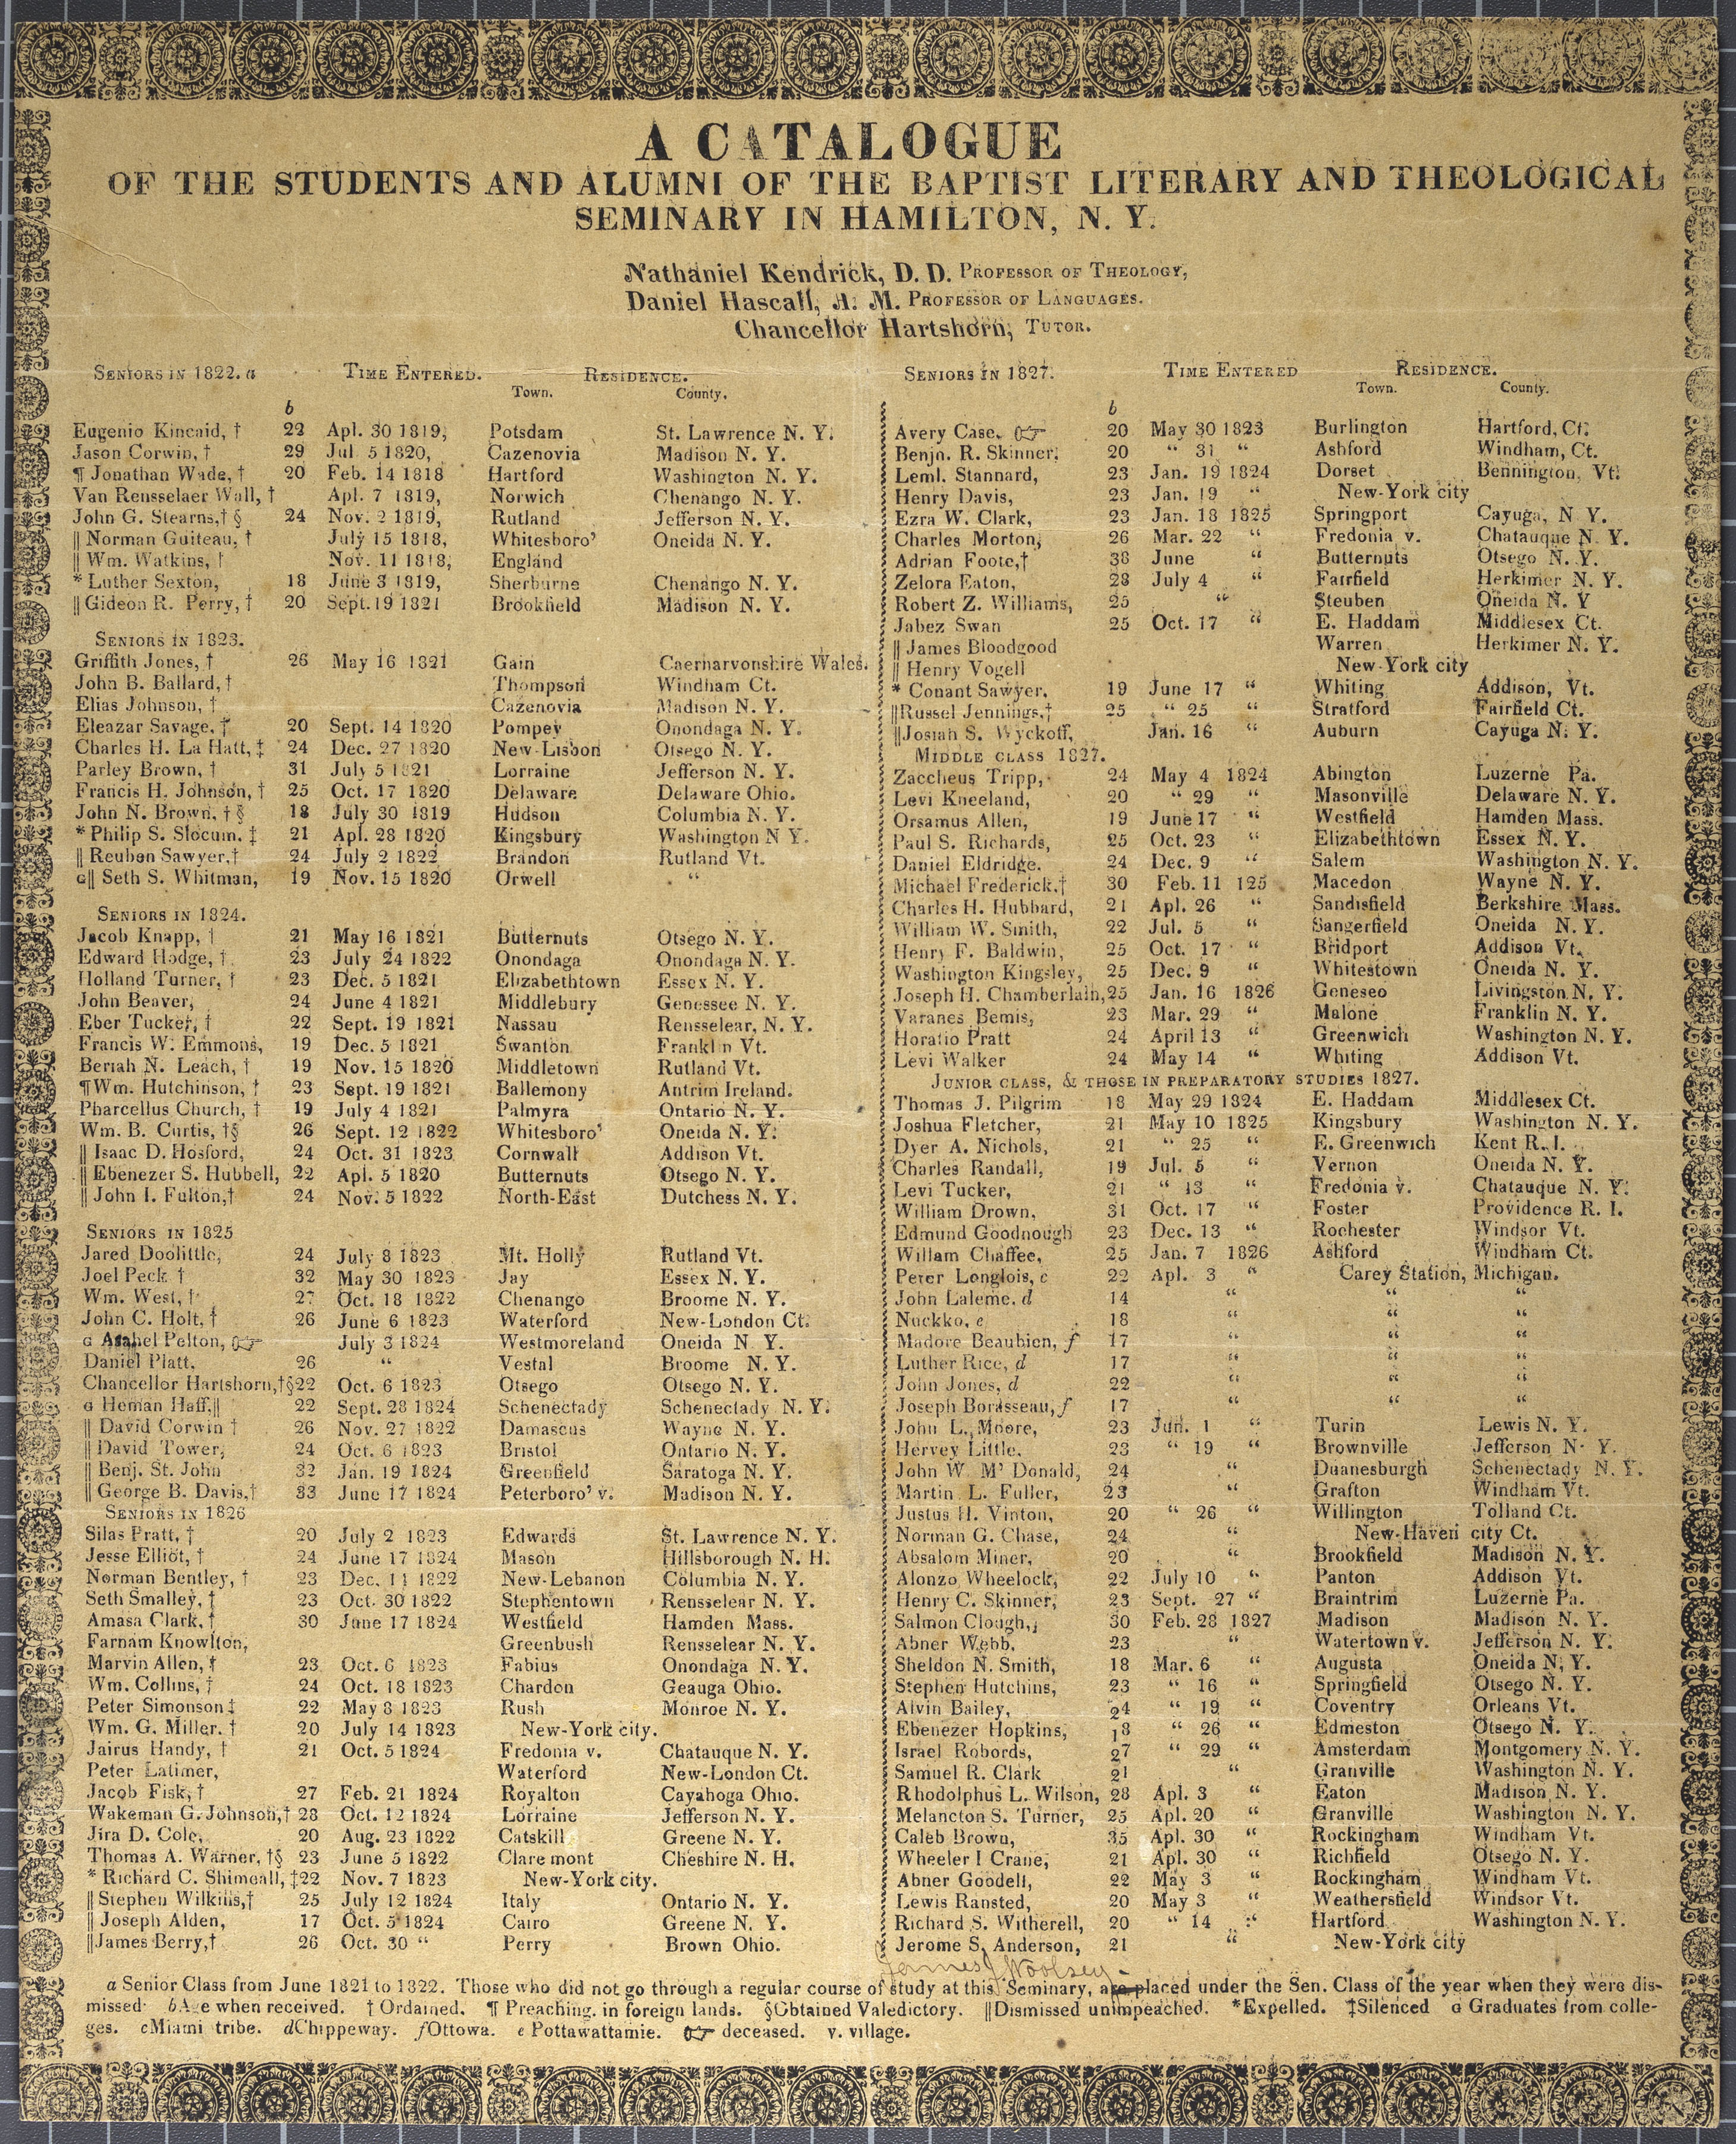 Catalogue of the first students of the Baptist Literary and Theological Seminary, circa 1827